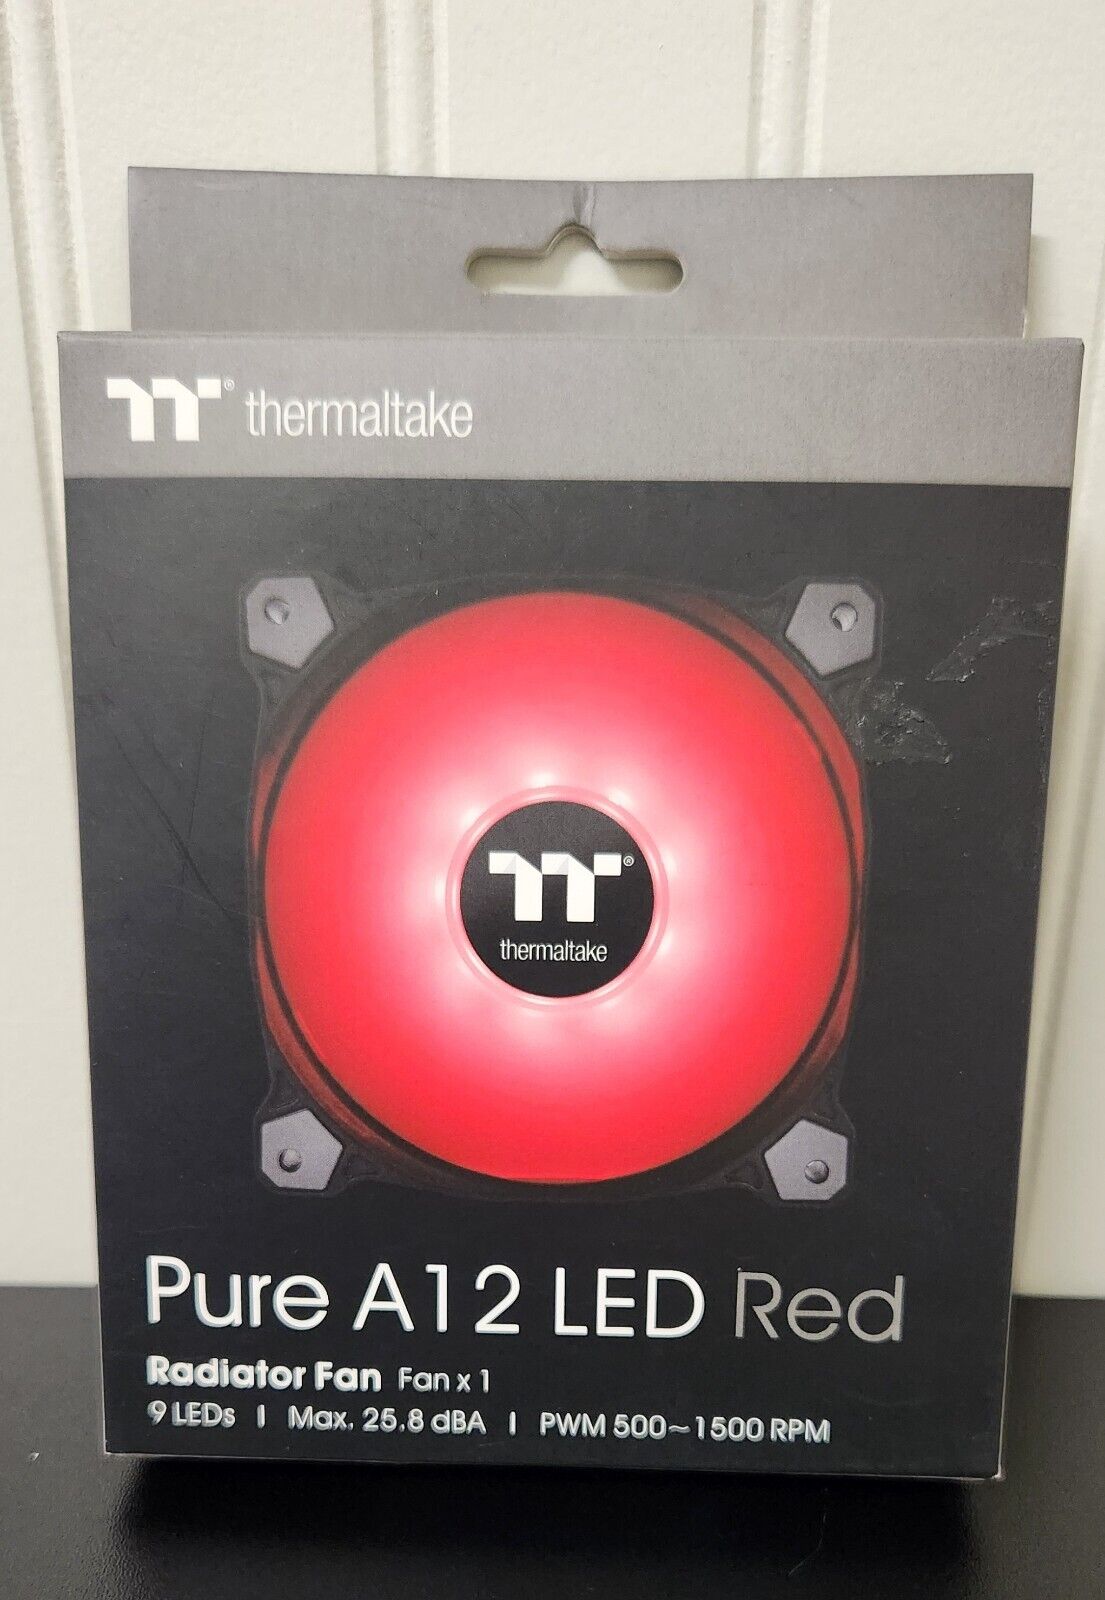 Thermaltake Pure A12 LED Red Radiator Fan